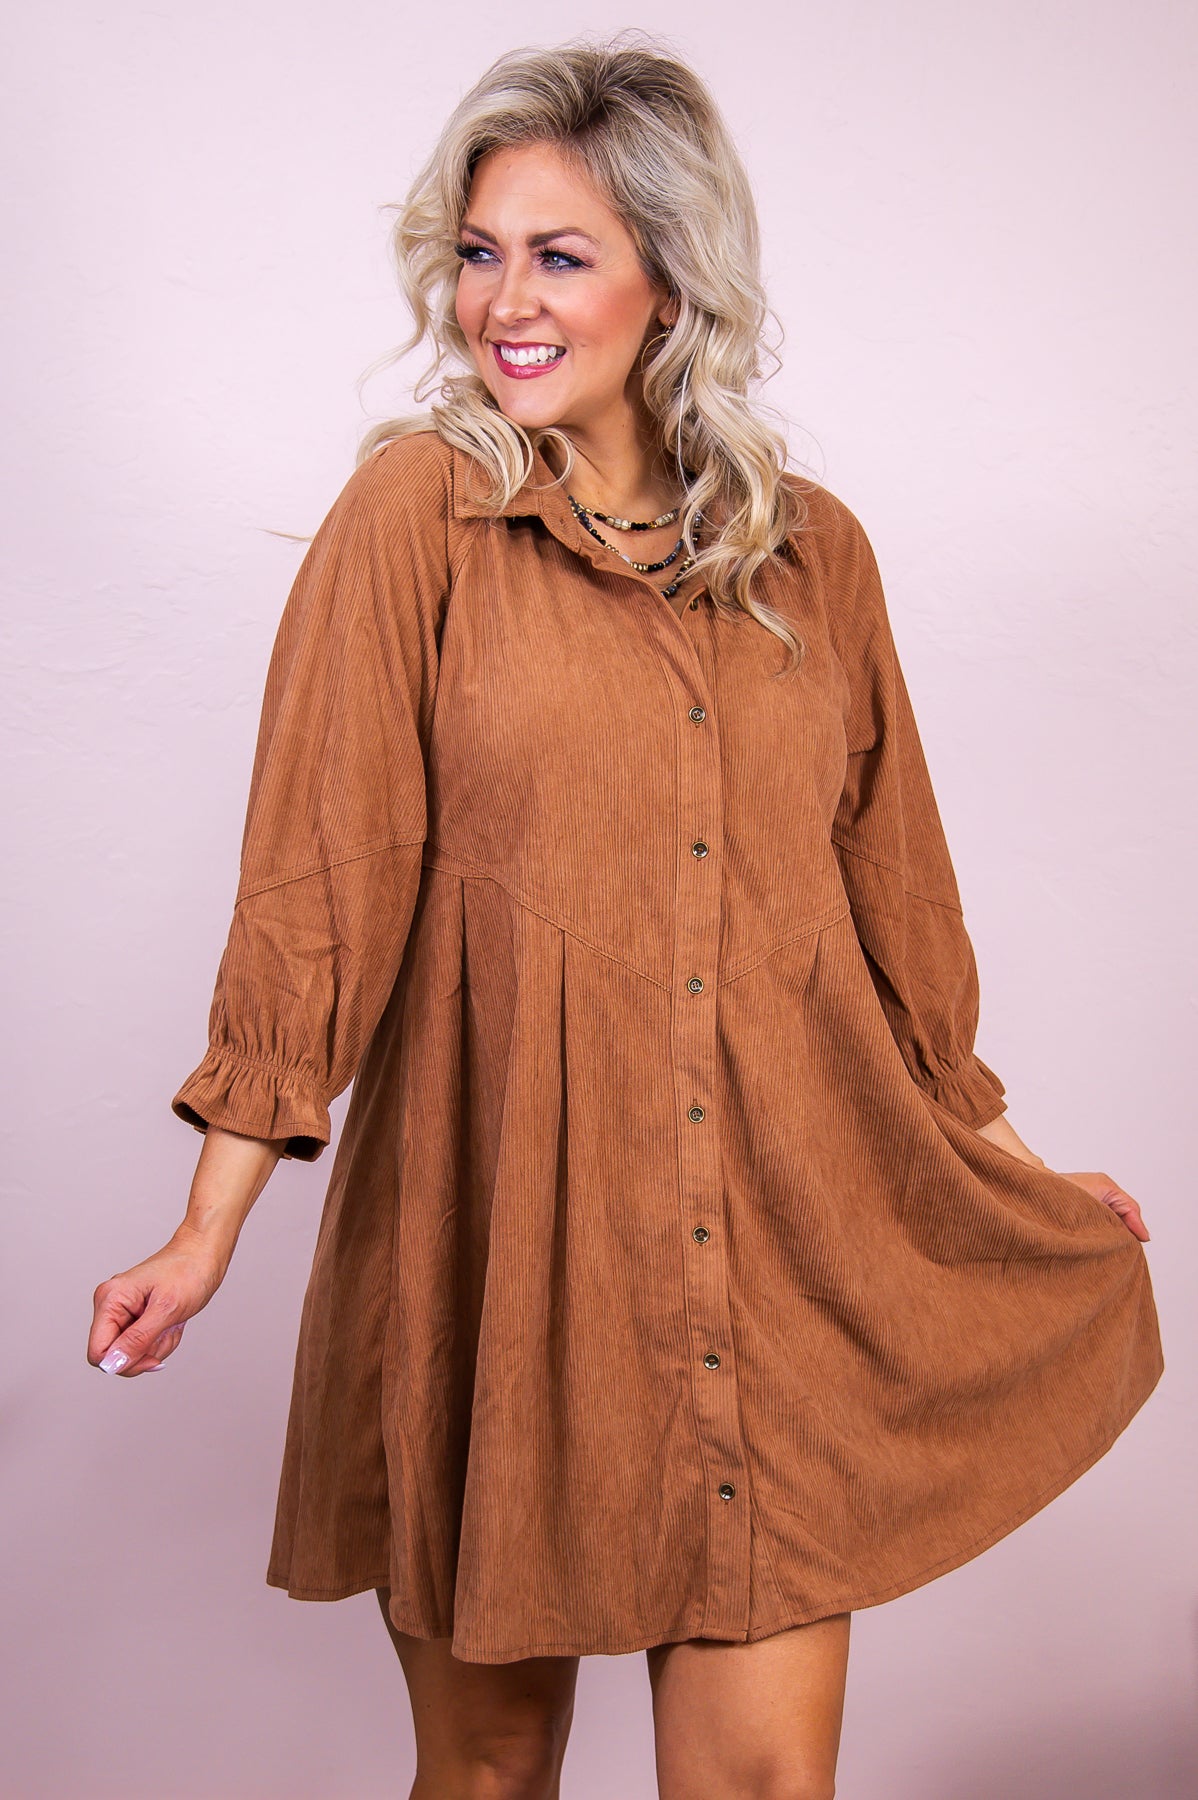 Take Me Out Dancing Brown Solid Dress - D4993BR